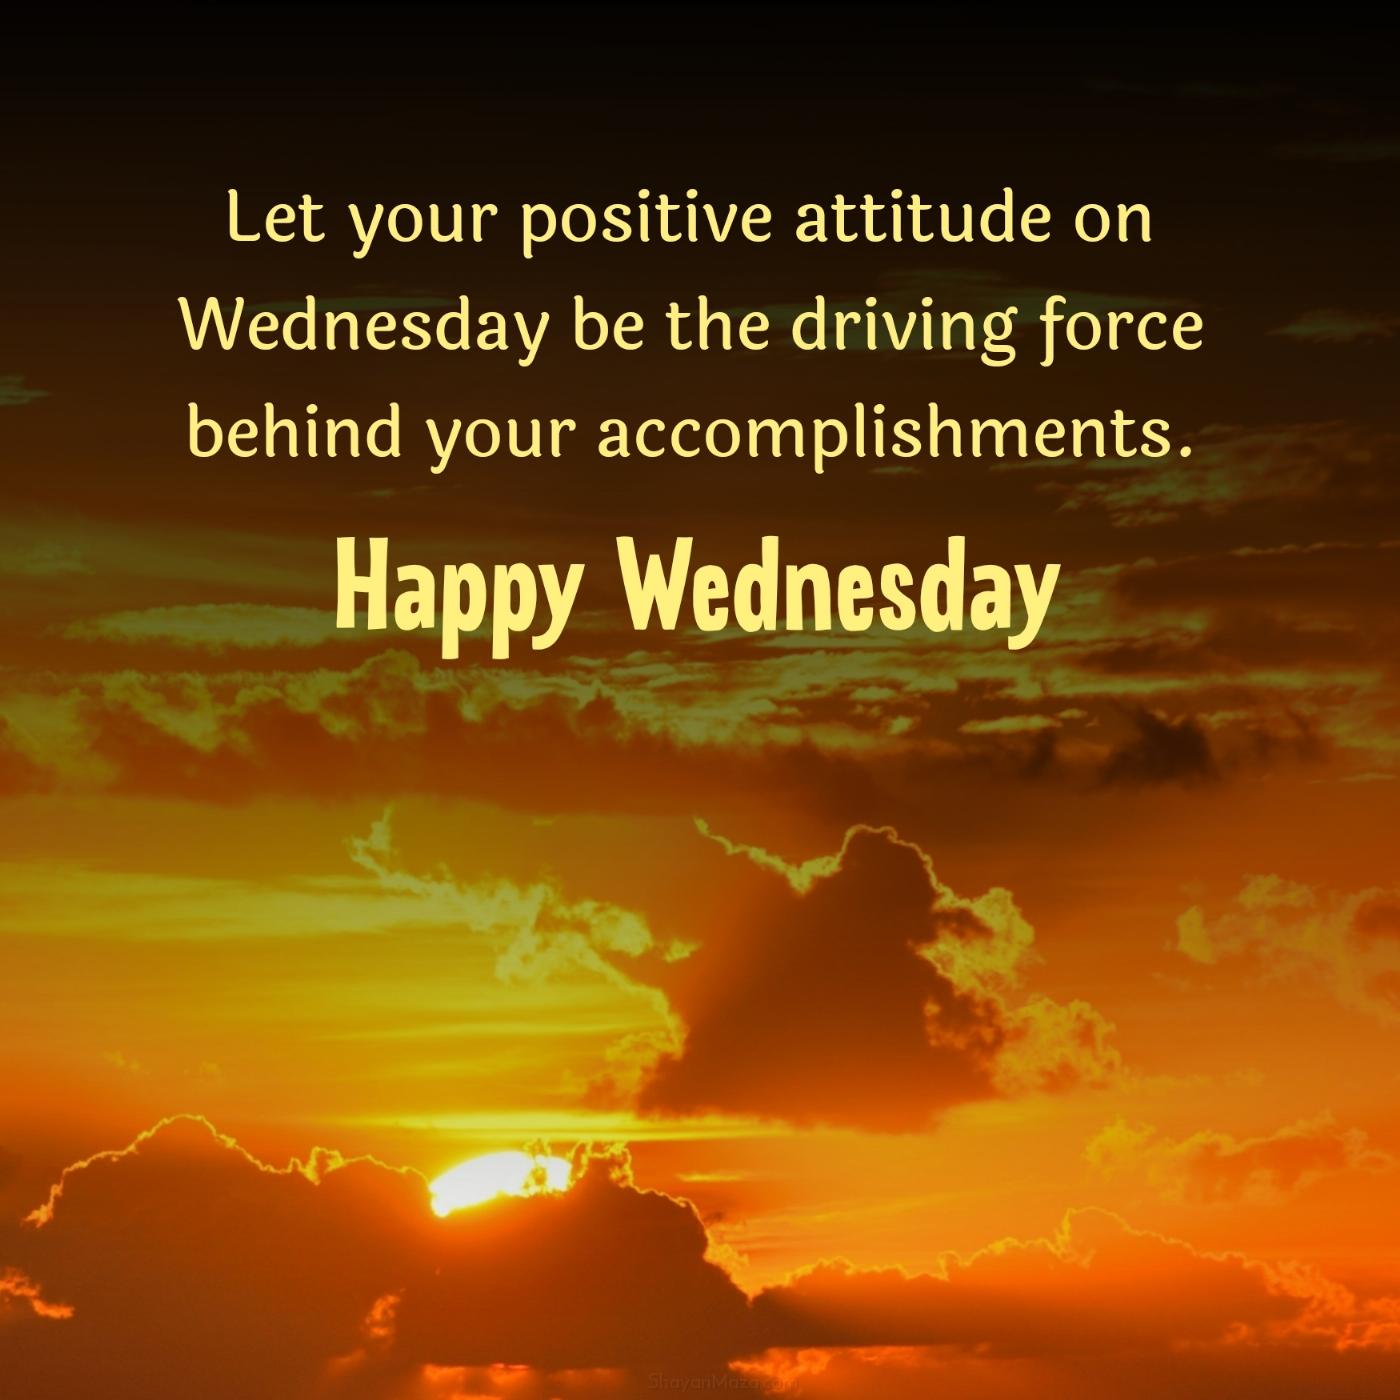 Let your positive attitude on Wednesday be the driving force